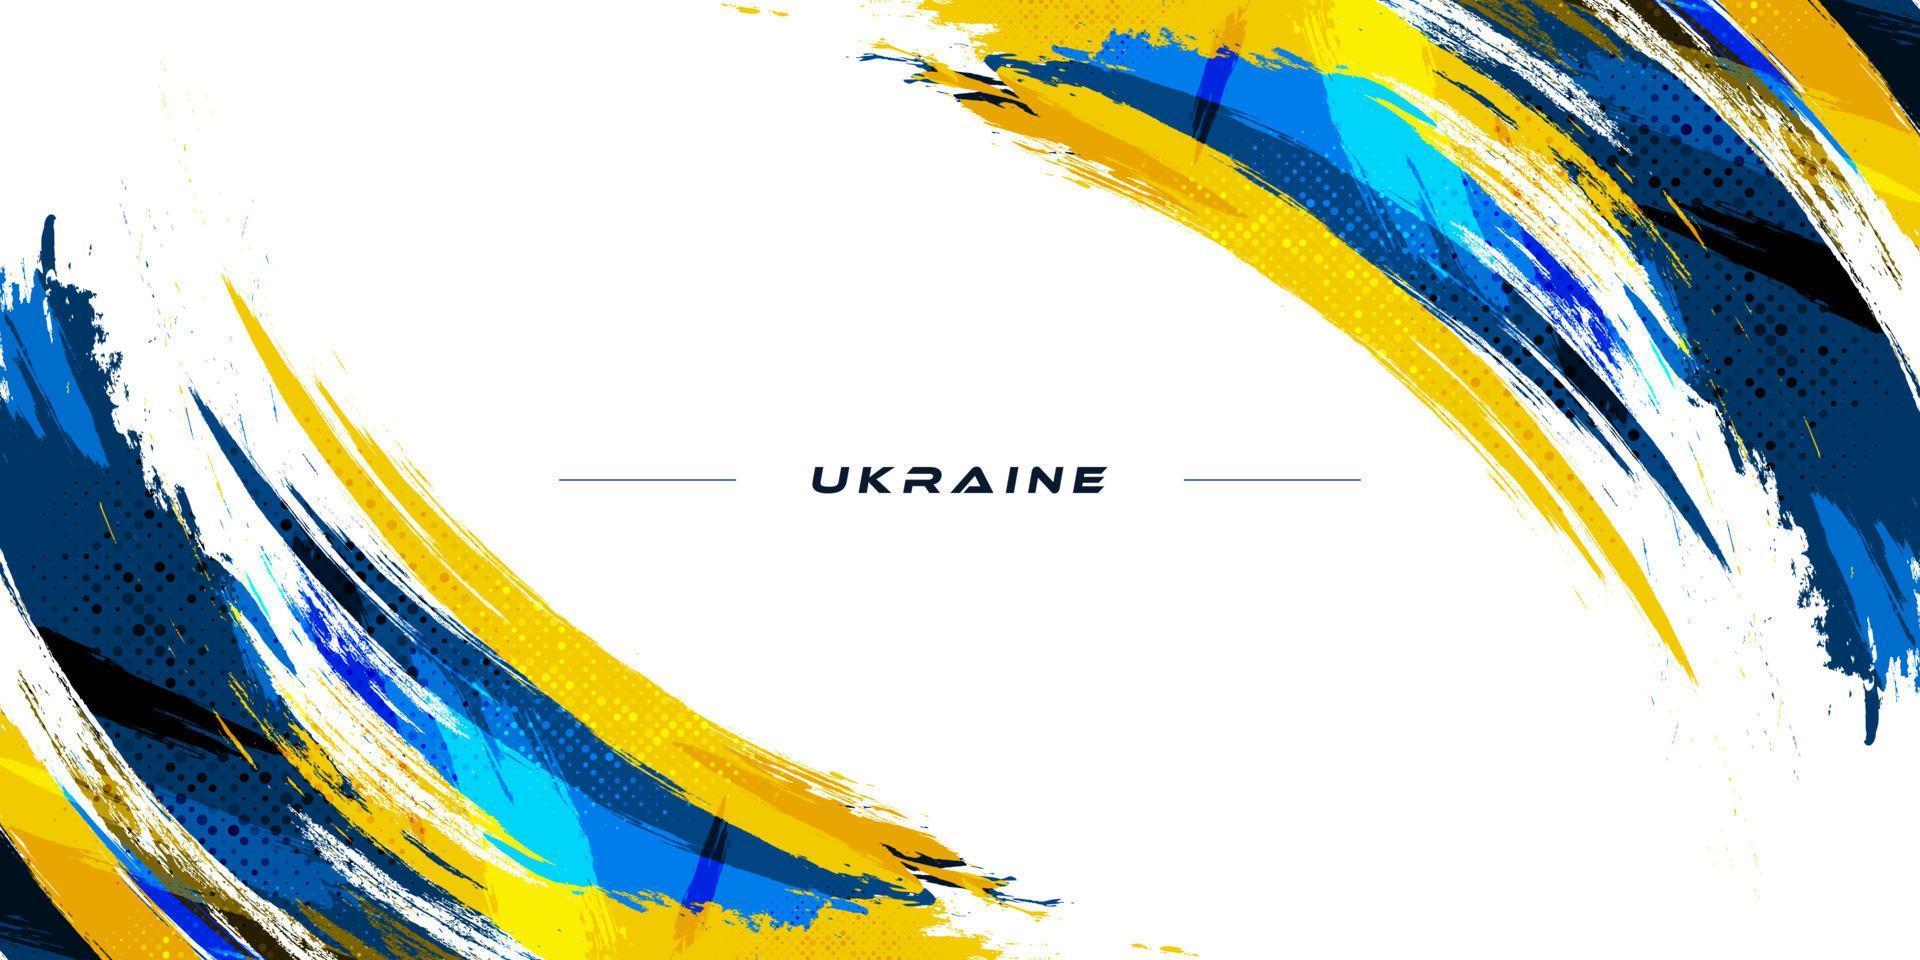 Ukraine Flag with Grunge and Brush Concept Isolated on White Background. Ukraine Background with Brush Style and Halftone Effect vector